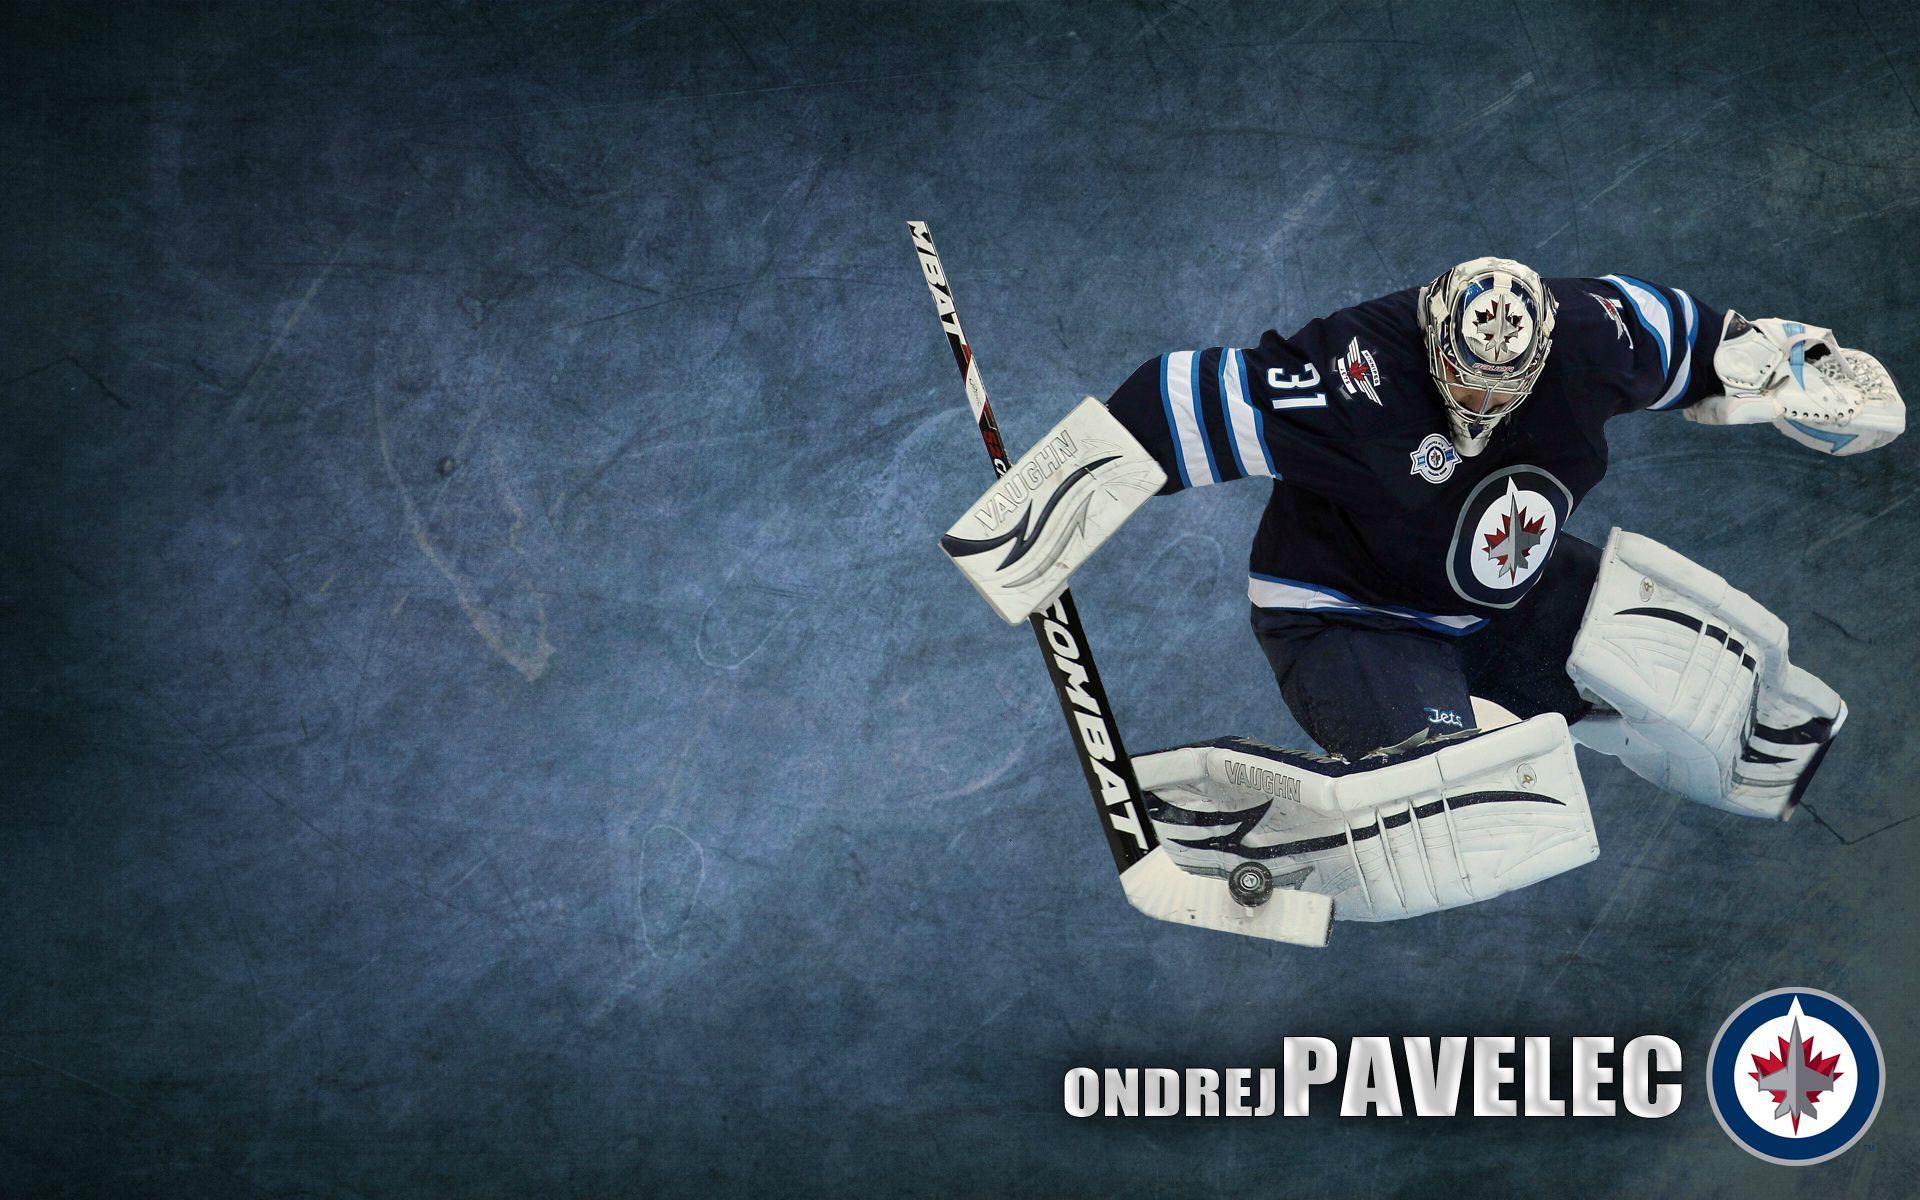 OT: I&;m looking for O. Pavelec wallpaper